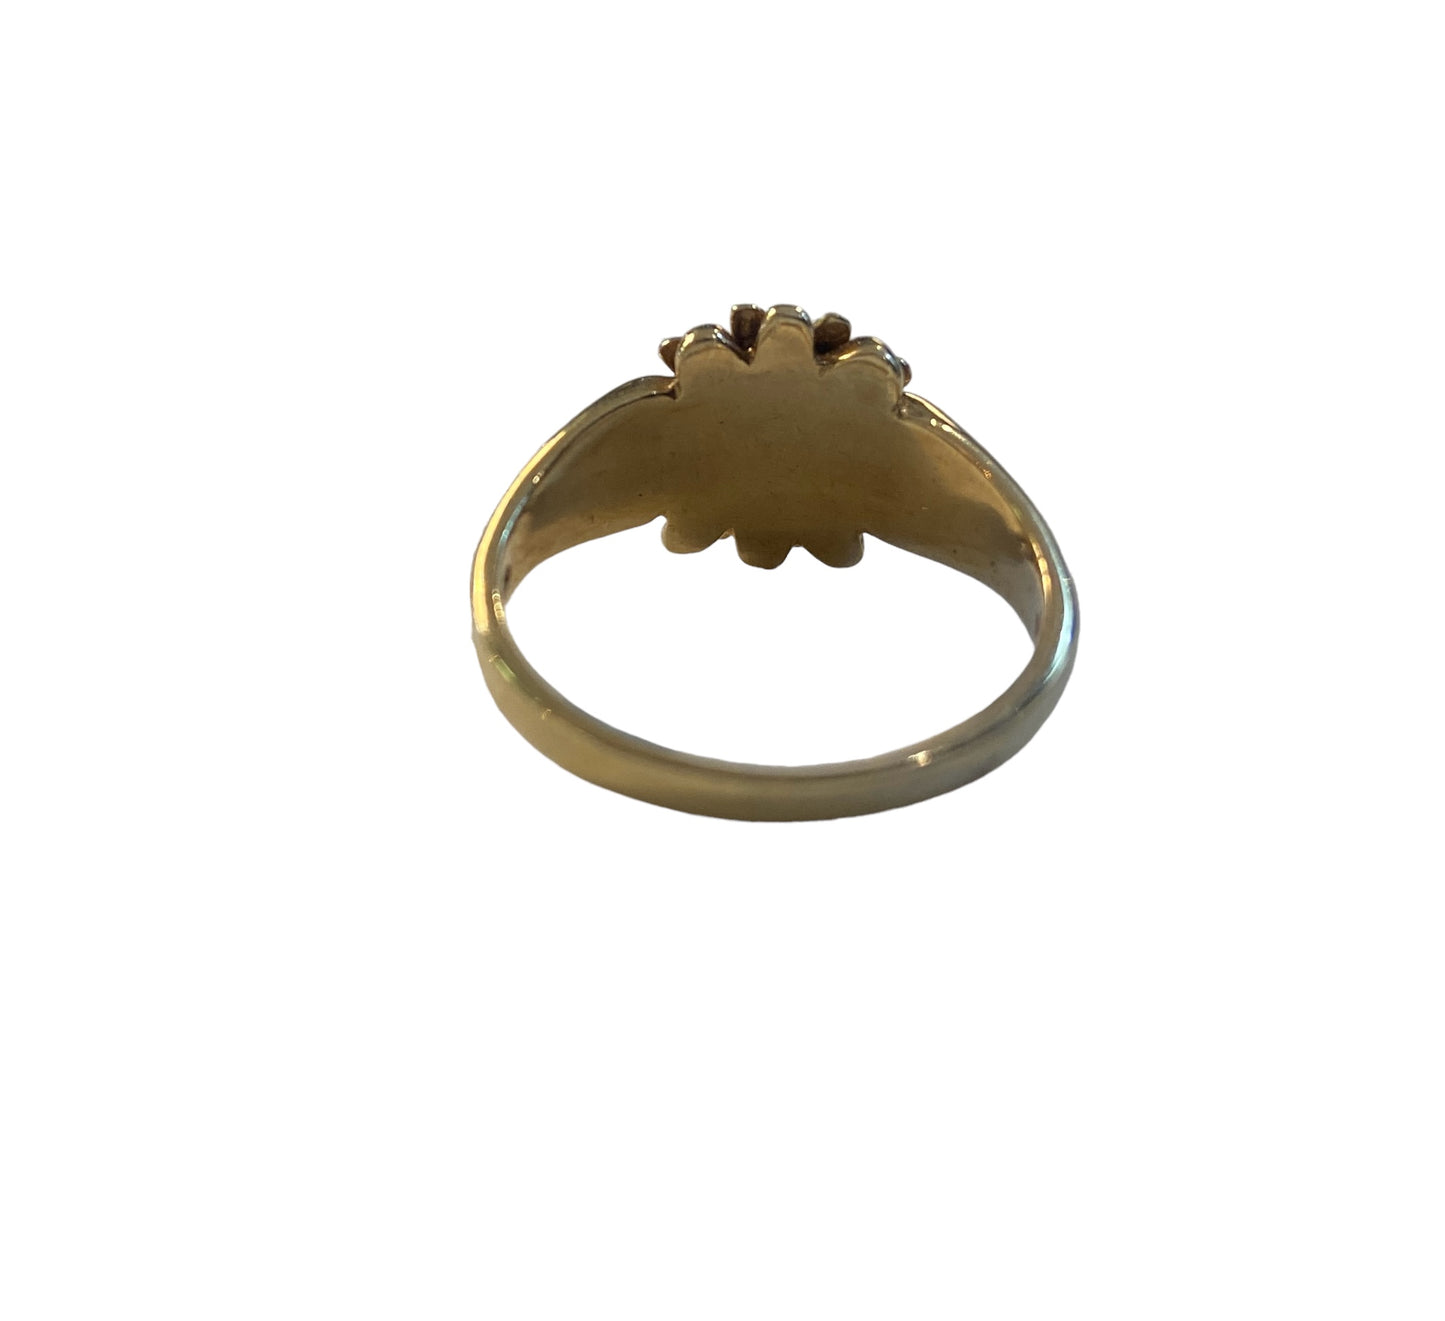 9ct gold pre owned flower ring circa 1996  size N